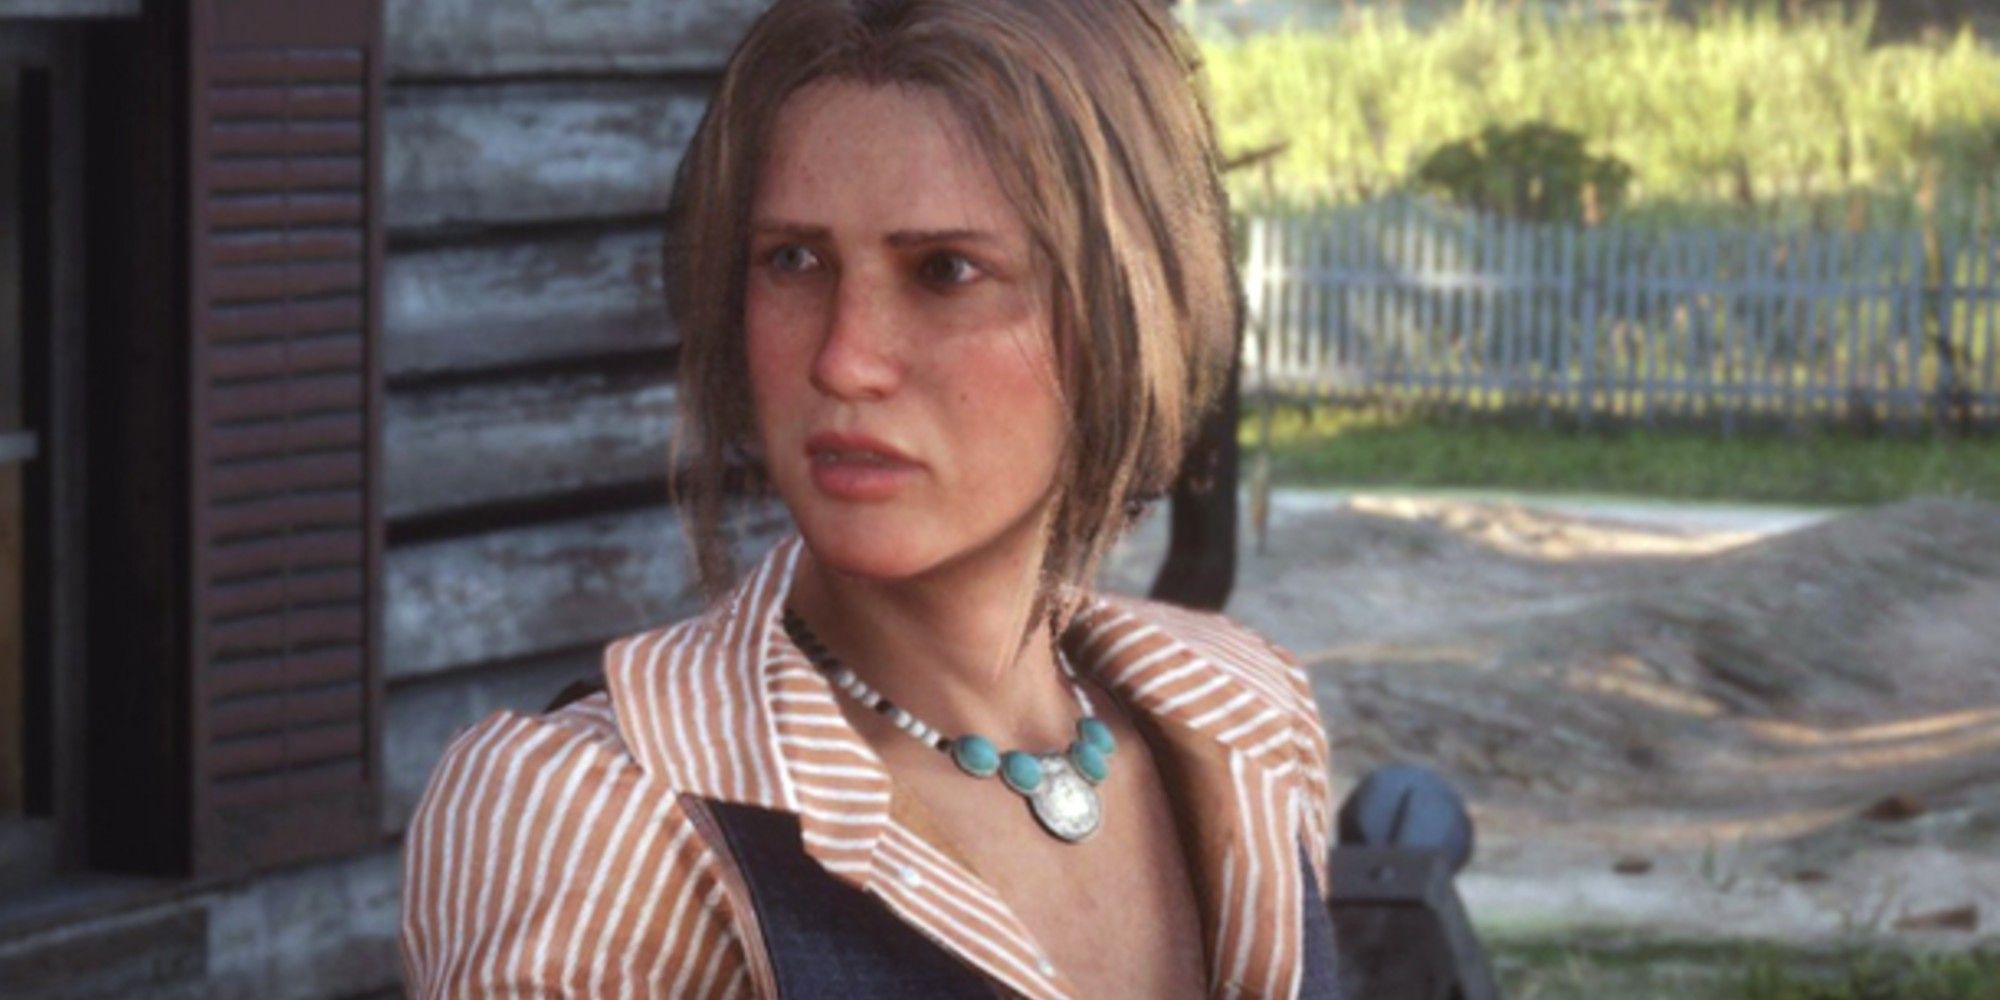 players only know Bonnie MacFarlane as a character in the original game